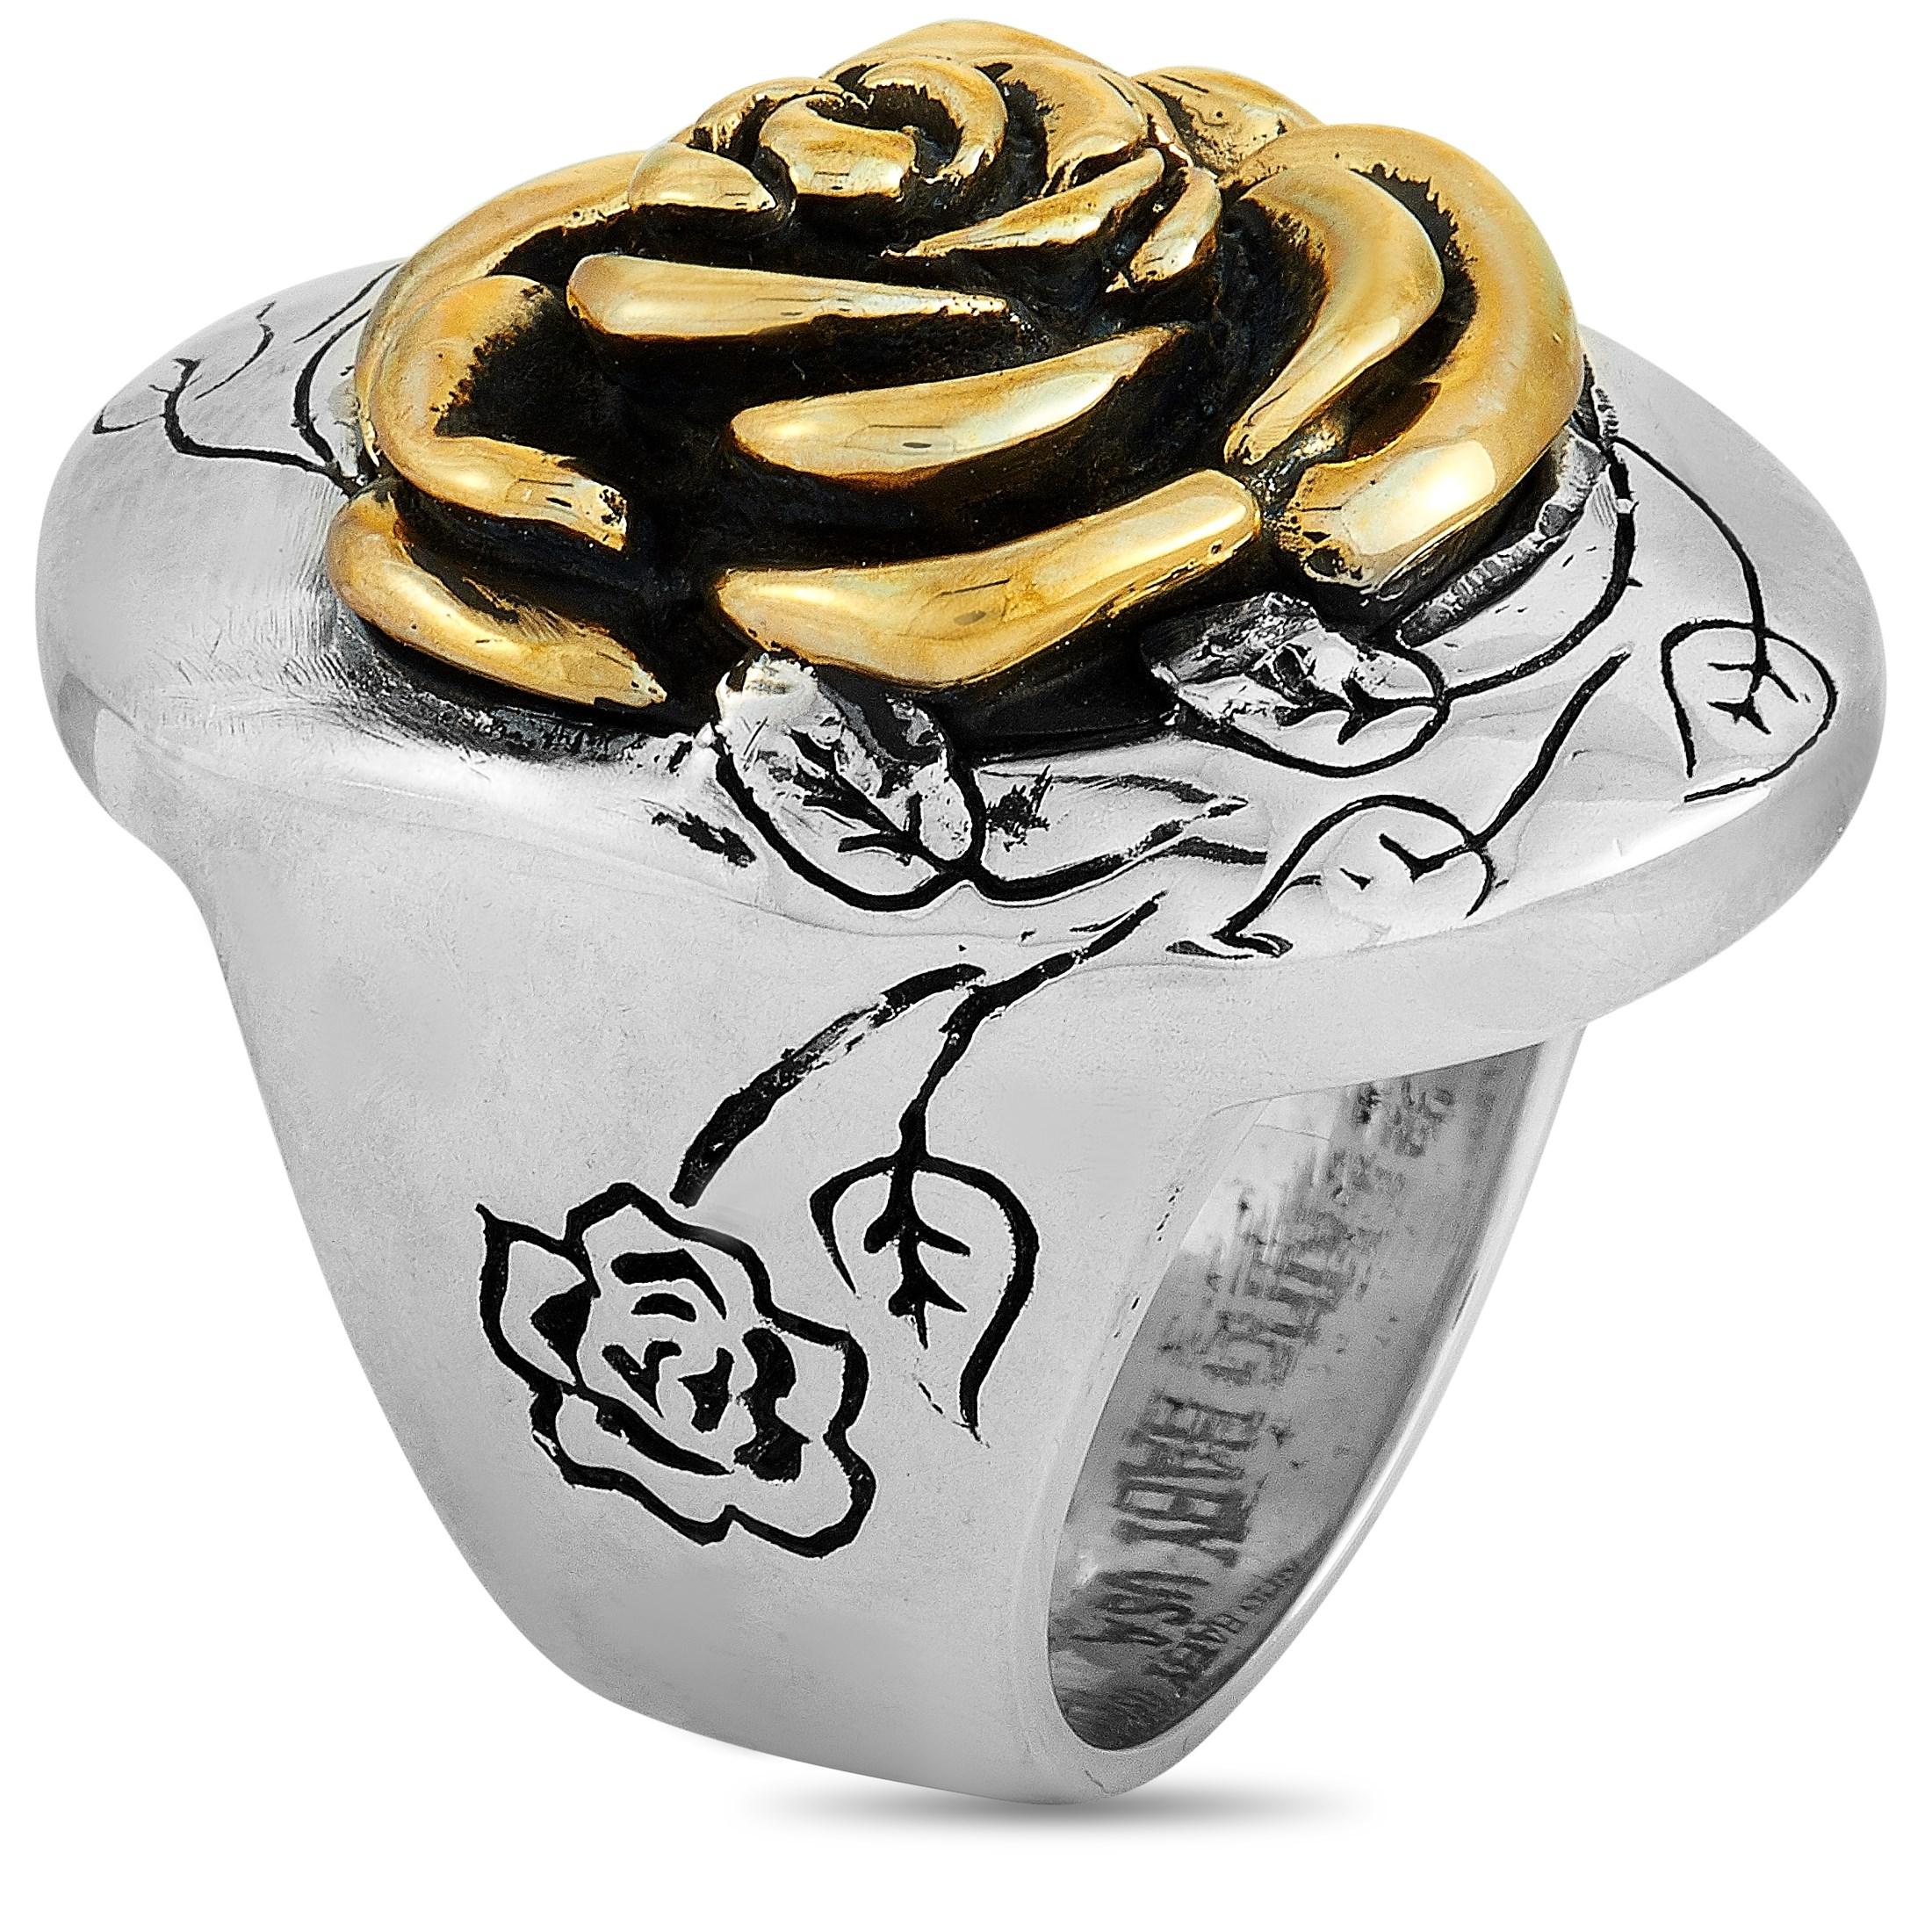 This King Baby rose ring is made out of sterling silver and alloy and weighs 53.5 grams. The ring boasts a band thickness of 8 mm and a top height of 12 mm, while top dimensions measure 23 by 34 mm.

Offered in brand-new condition, this item